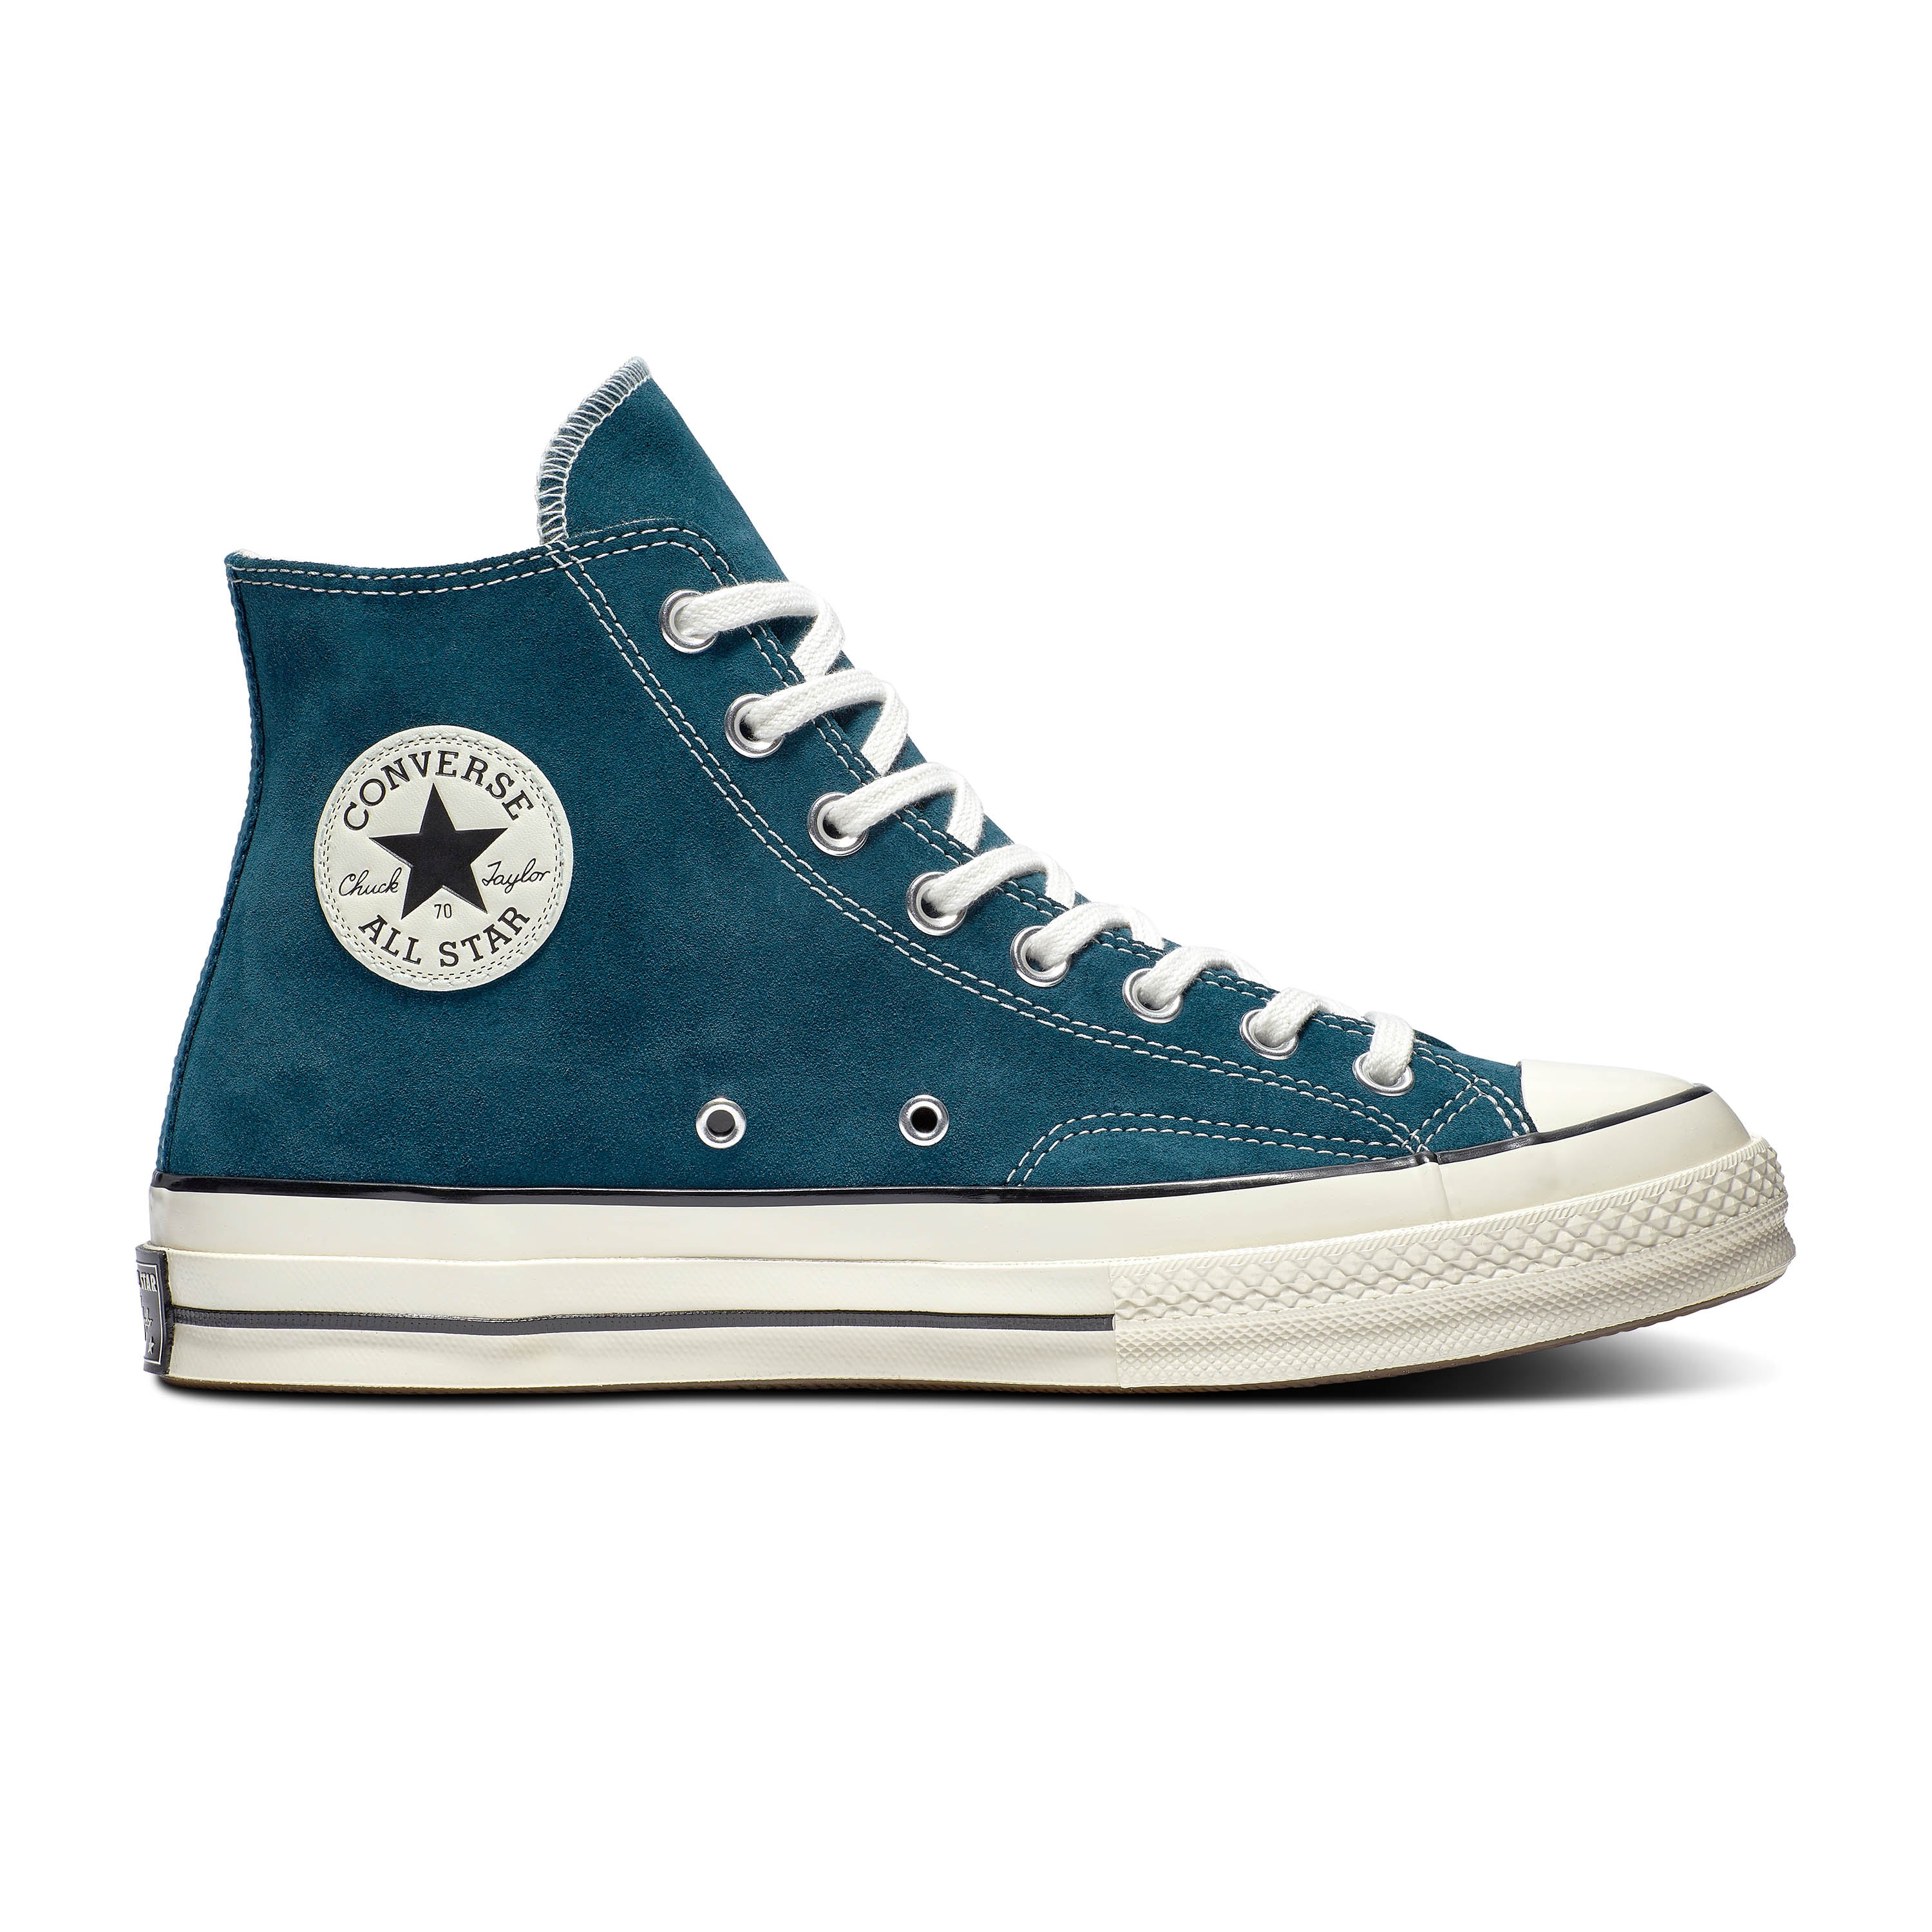 converse turquoise